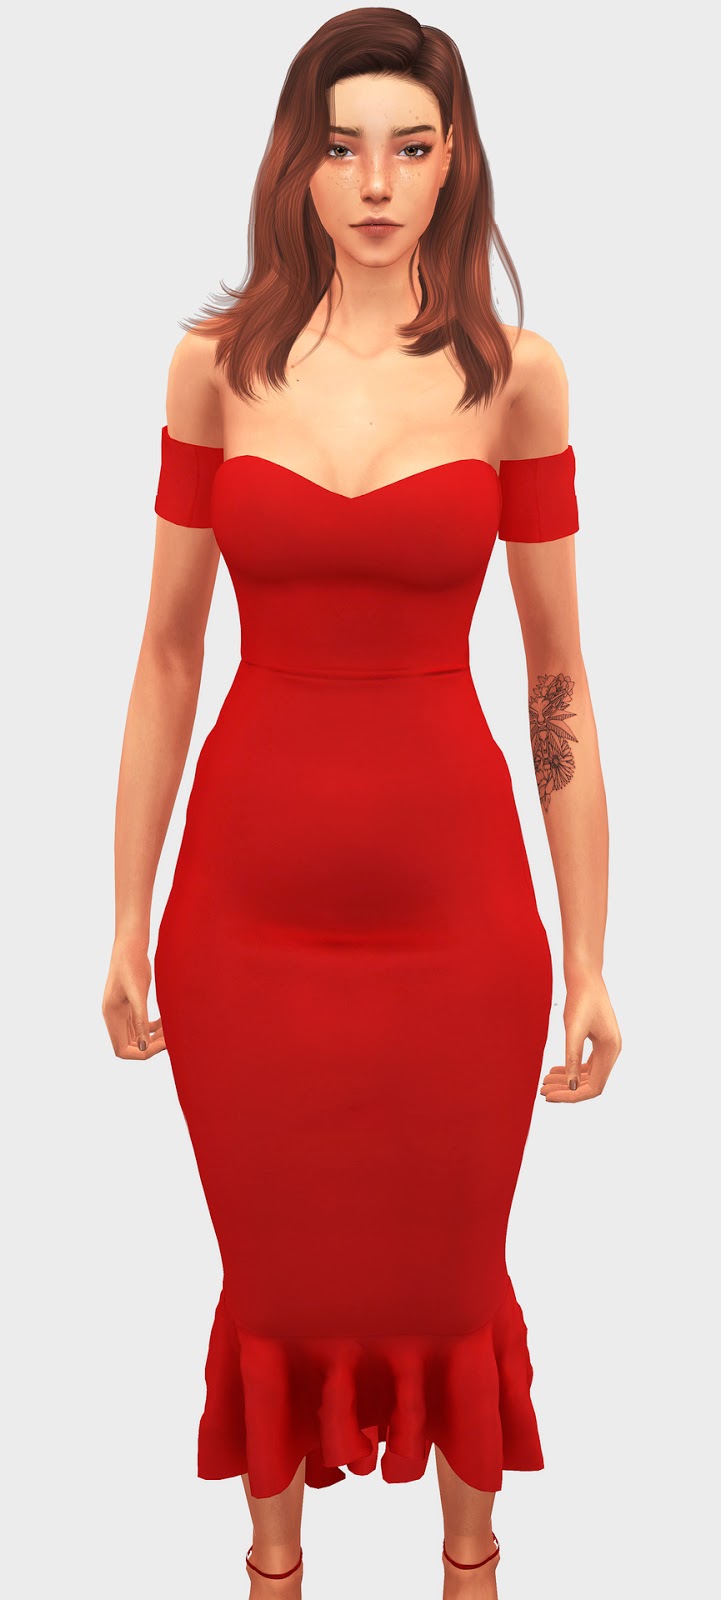 Elliesimple Sims 4 Dresses Ts4 Clothes Sims 4 Clothing - Vrogue